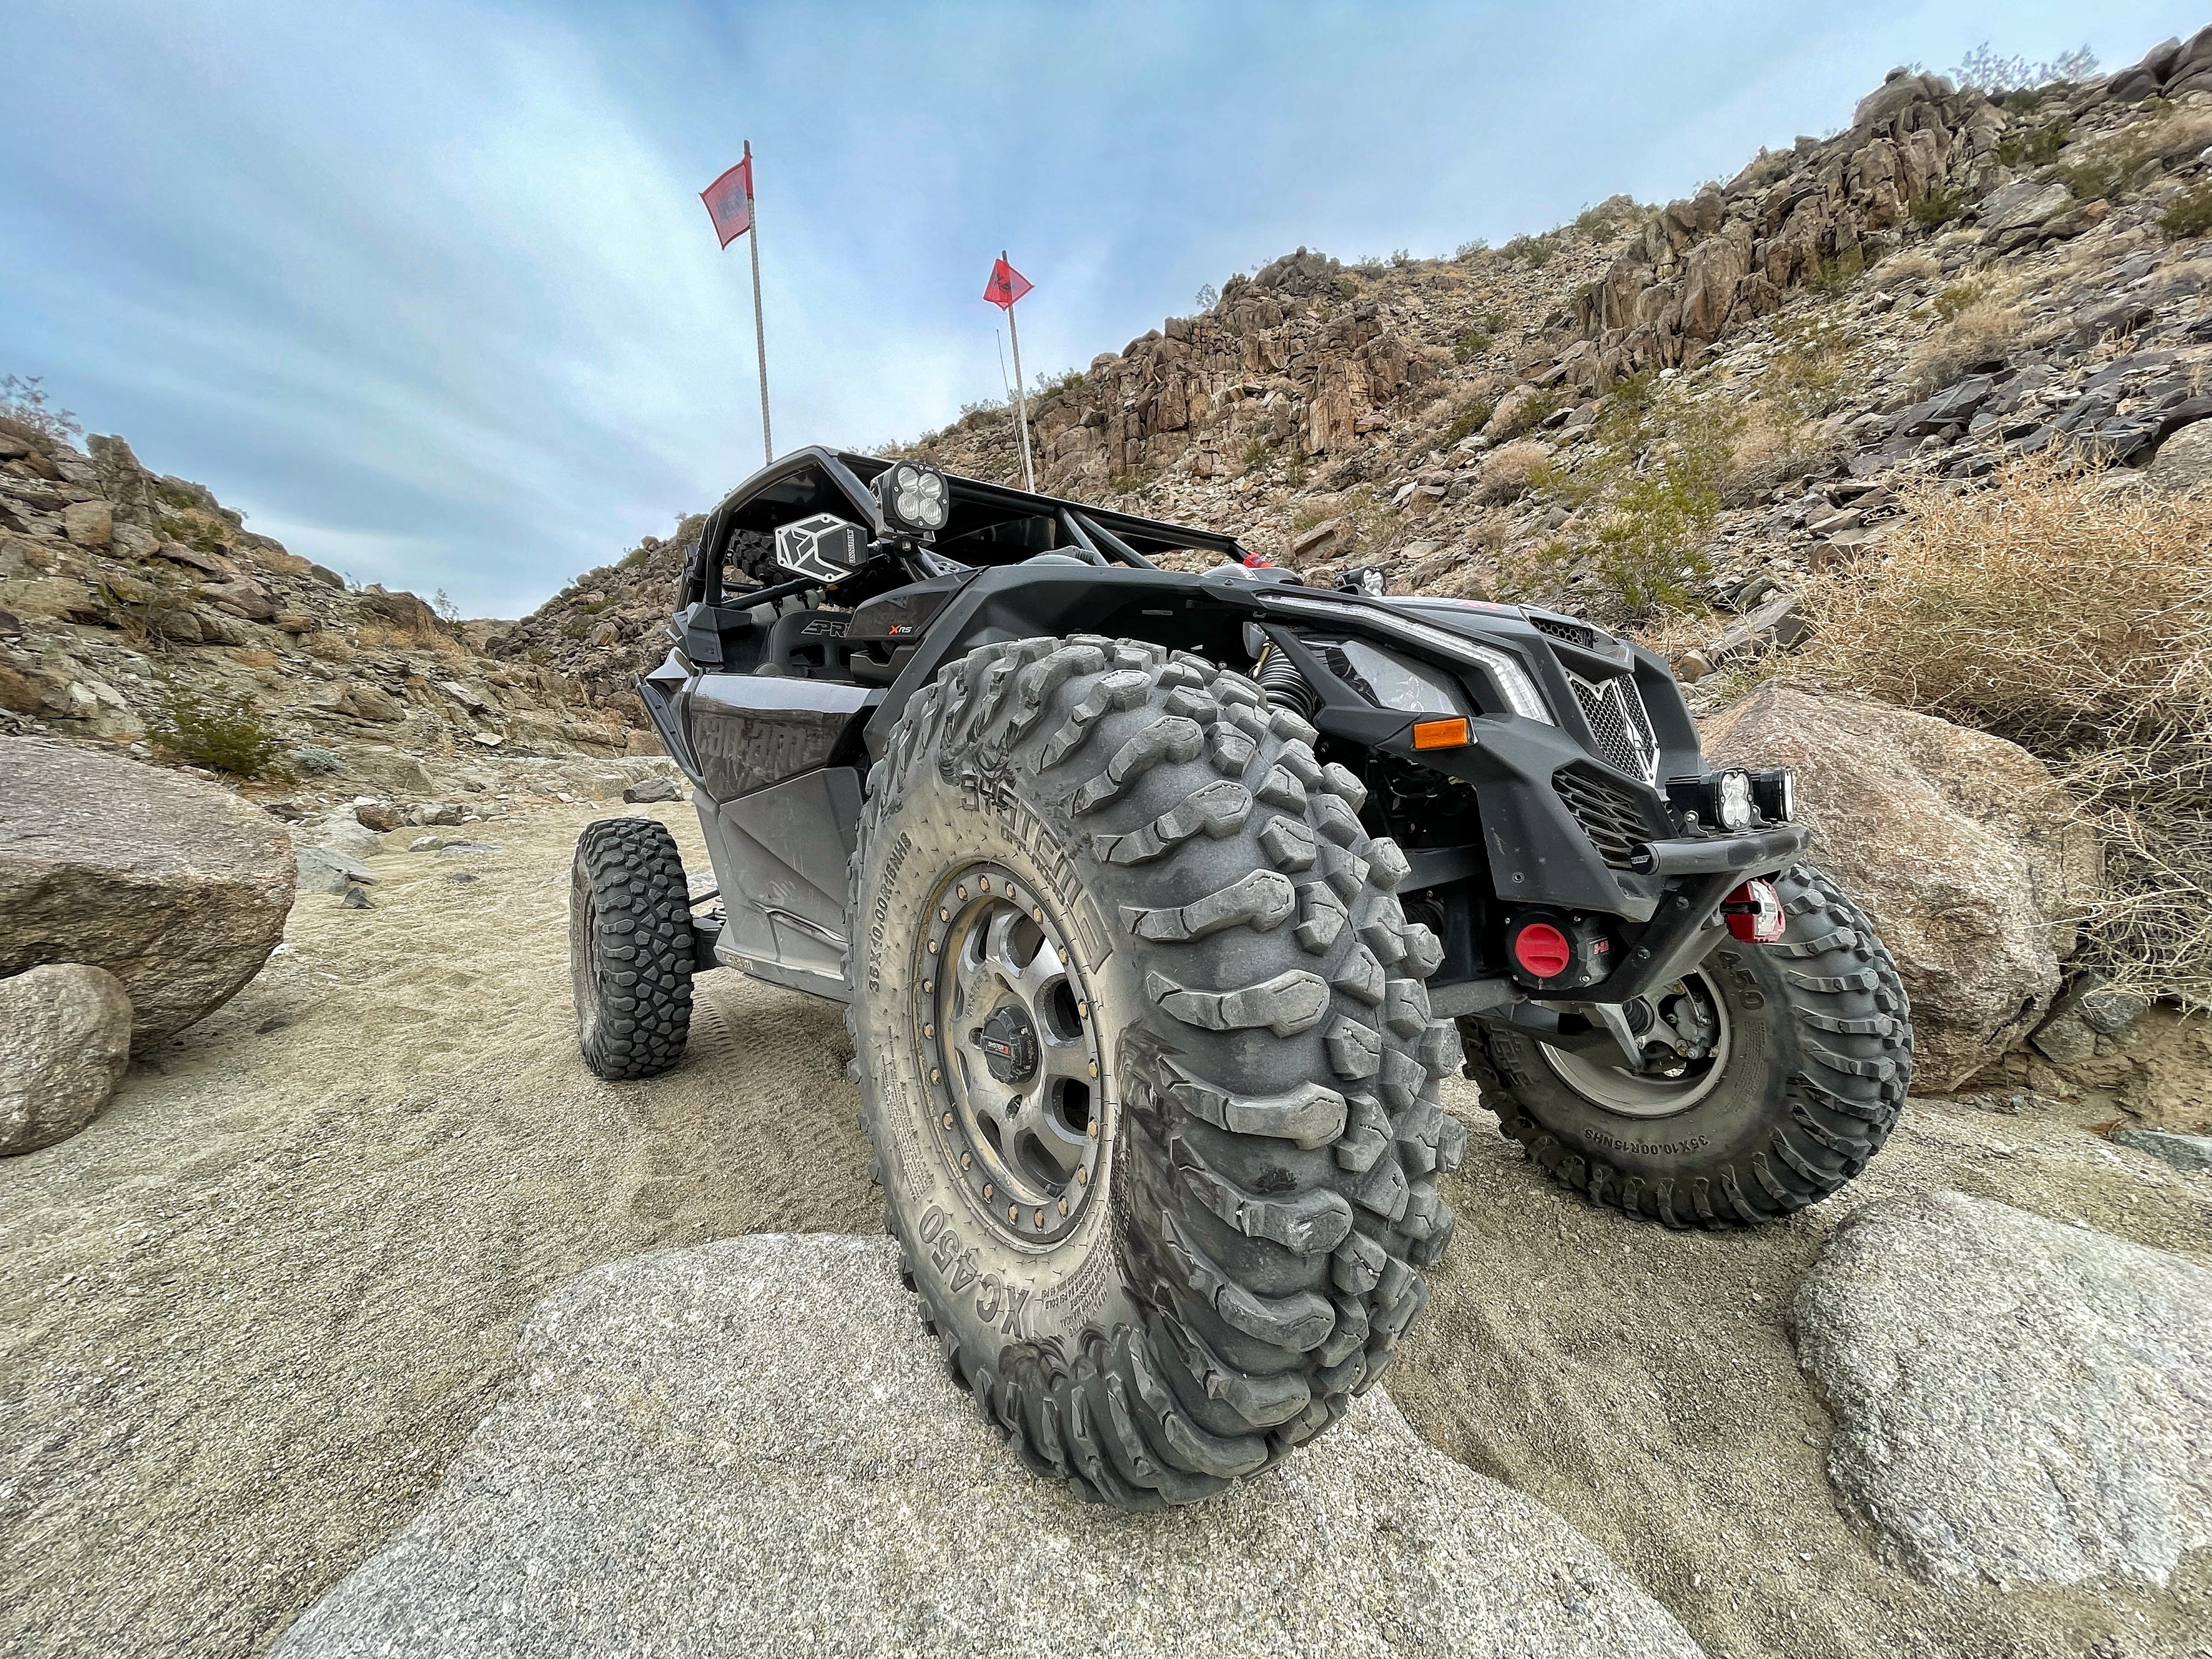 Custom-built black Can-Am side-by-side going downhill with its right front wheel on a rock.